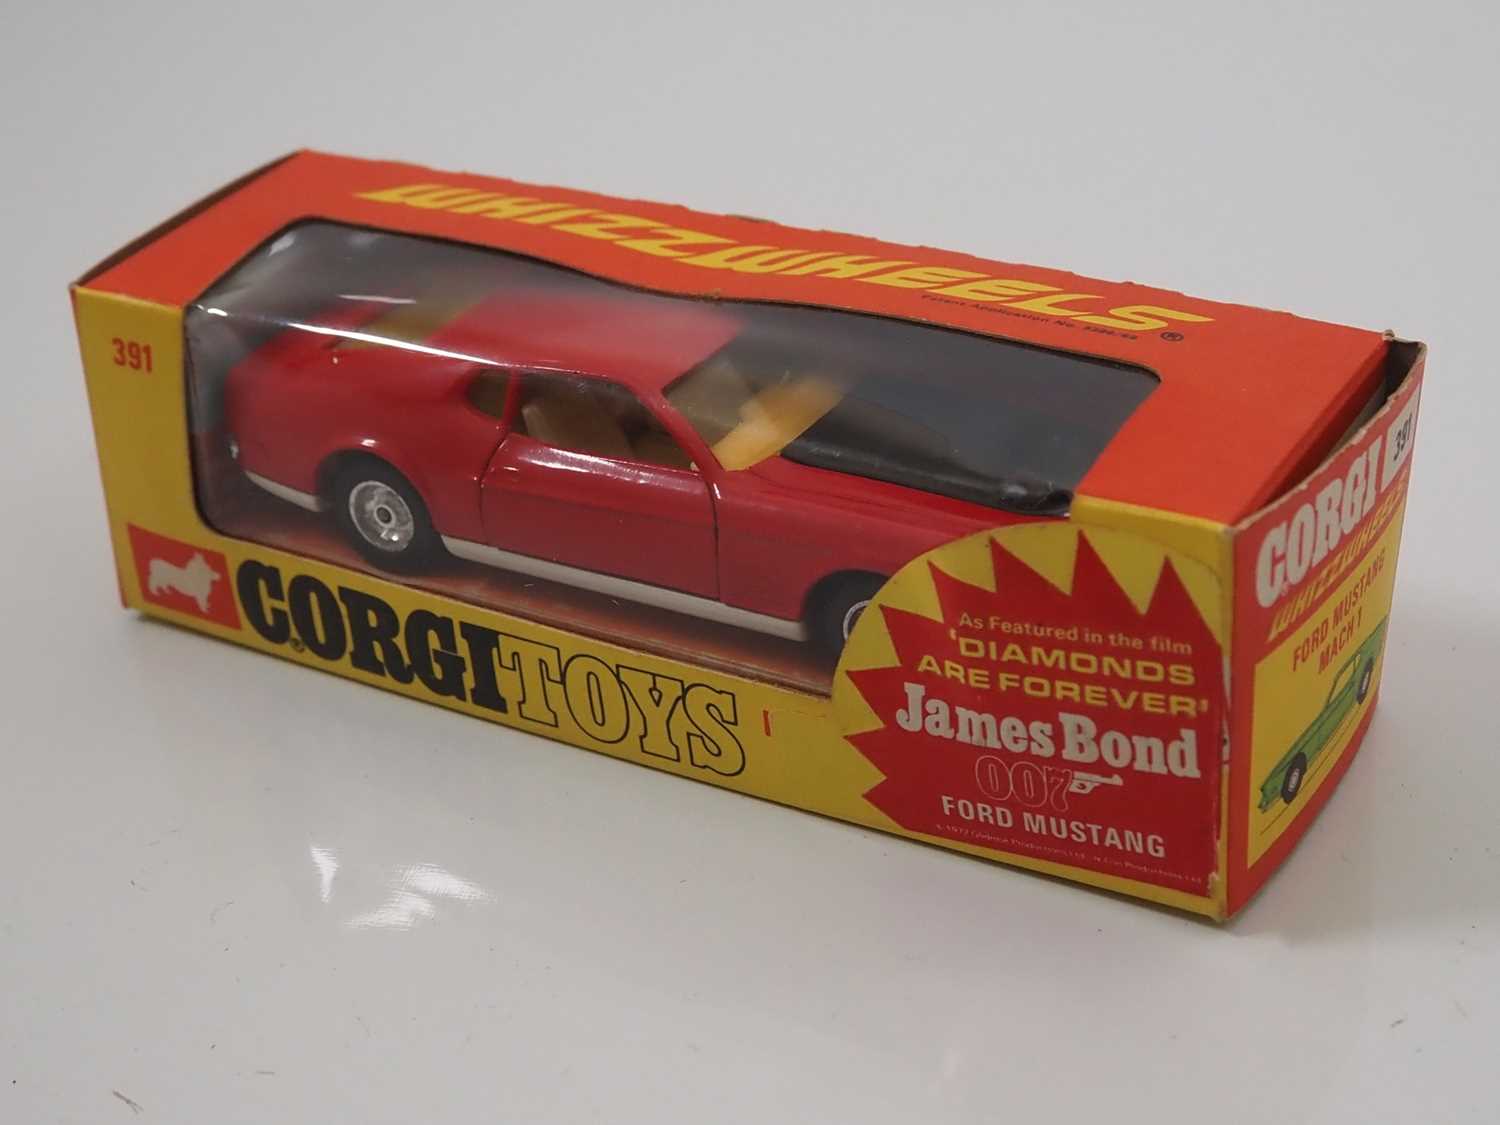 A CORGI 391 diecast 'James Bond Diamonds Are Forever' Ford Mustang Mach 1 with red body, white - Image 4 of 5